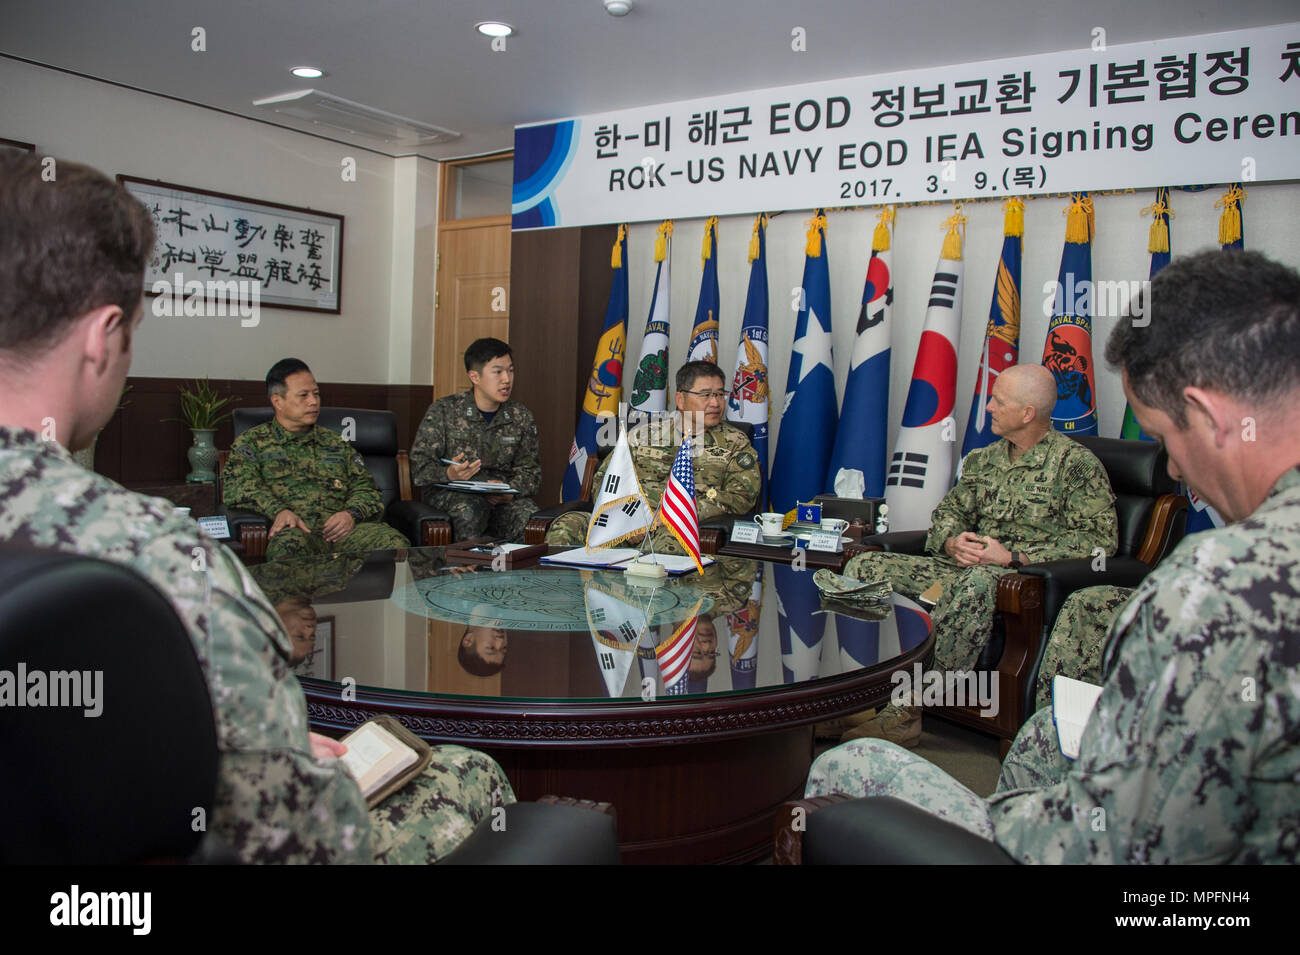 Commander, Task Force 75, U.S. Navy Capt. Robert A. Baughman, and Commander, Republic of Korea (ROK) Naval Special Warfare Flotilla, Rear Adm. Jae Eun Lee, speak during an information exchange agreement signing in Jinhae, ROK, March 9, 2017, as part of exercise Foal Eagle 2017. The agreement addresses research and development practices between the two nations, promotes explosive ordnance disposal interoperability, and enhances future readiness. (U.S. Navy Combat Camera photo by Mass Communication Specialist 3rd Class Alfred A. Coffield) Stock Photo